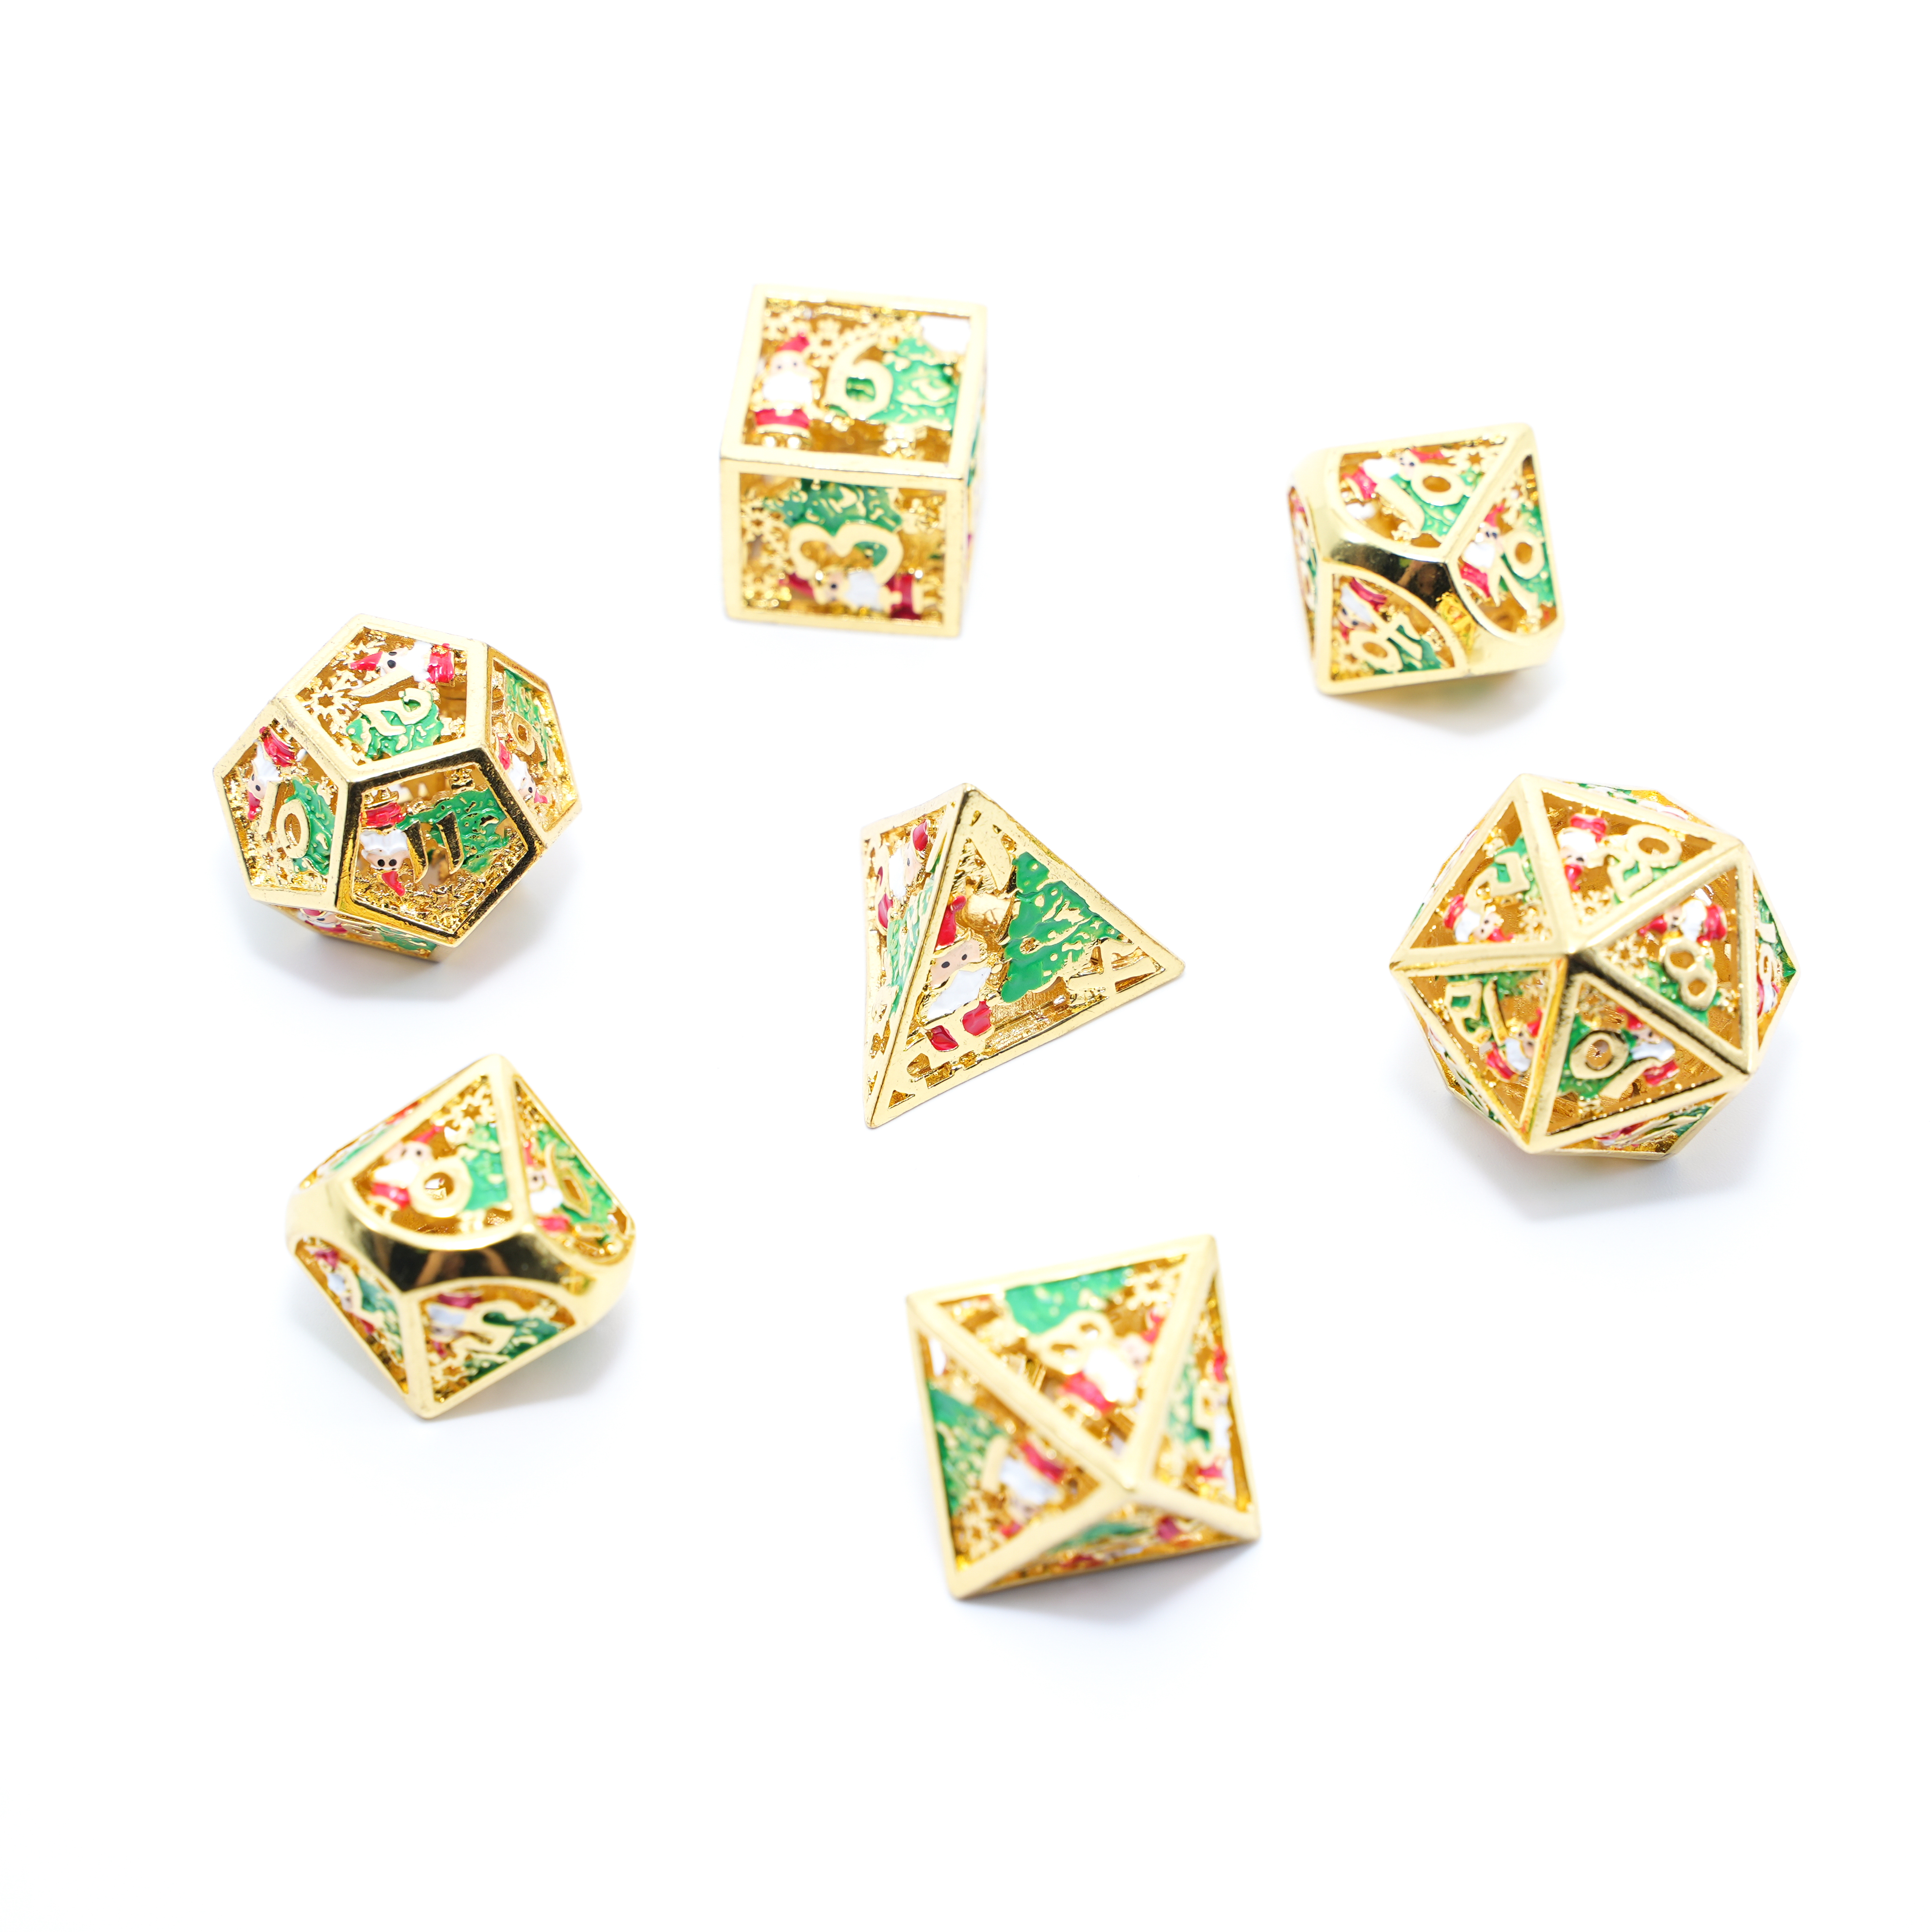 Get Festive with <a href='/metal-santa-dice/'>Metal Santa Dice</a> - Direct from Factory in OPP Bag or Iron Box!